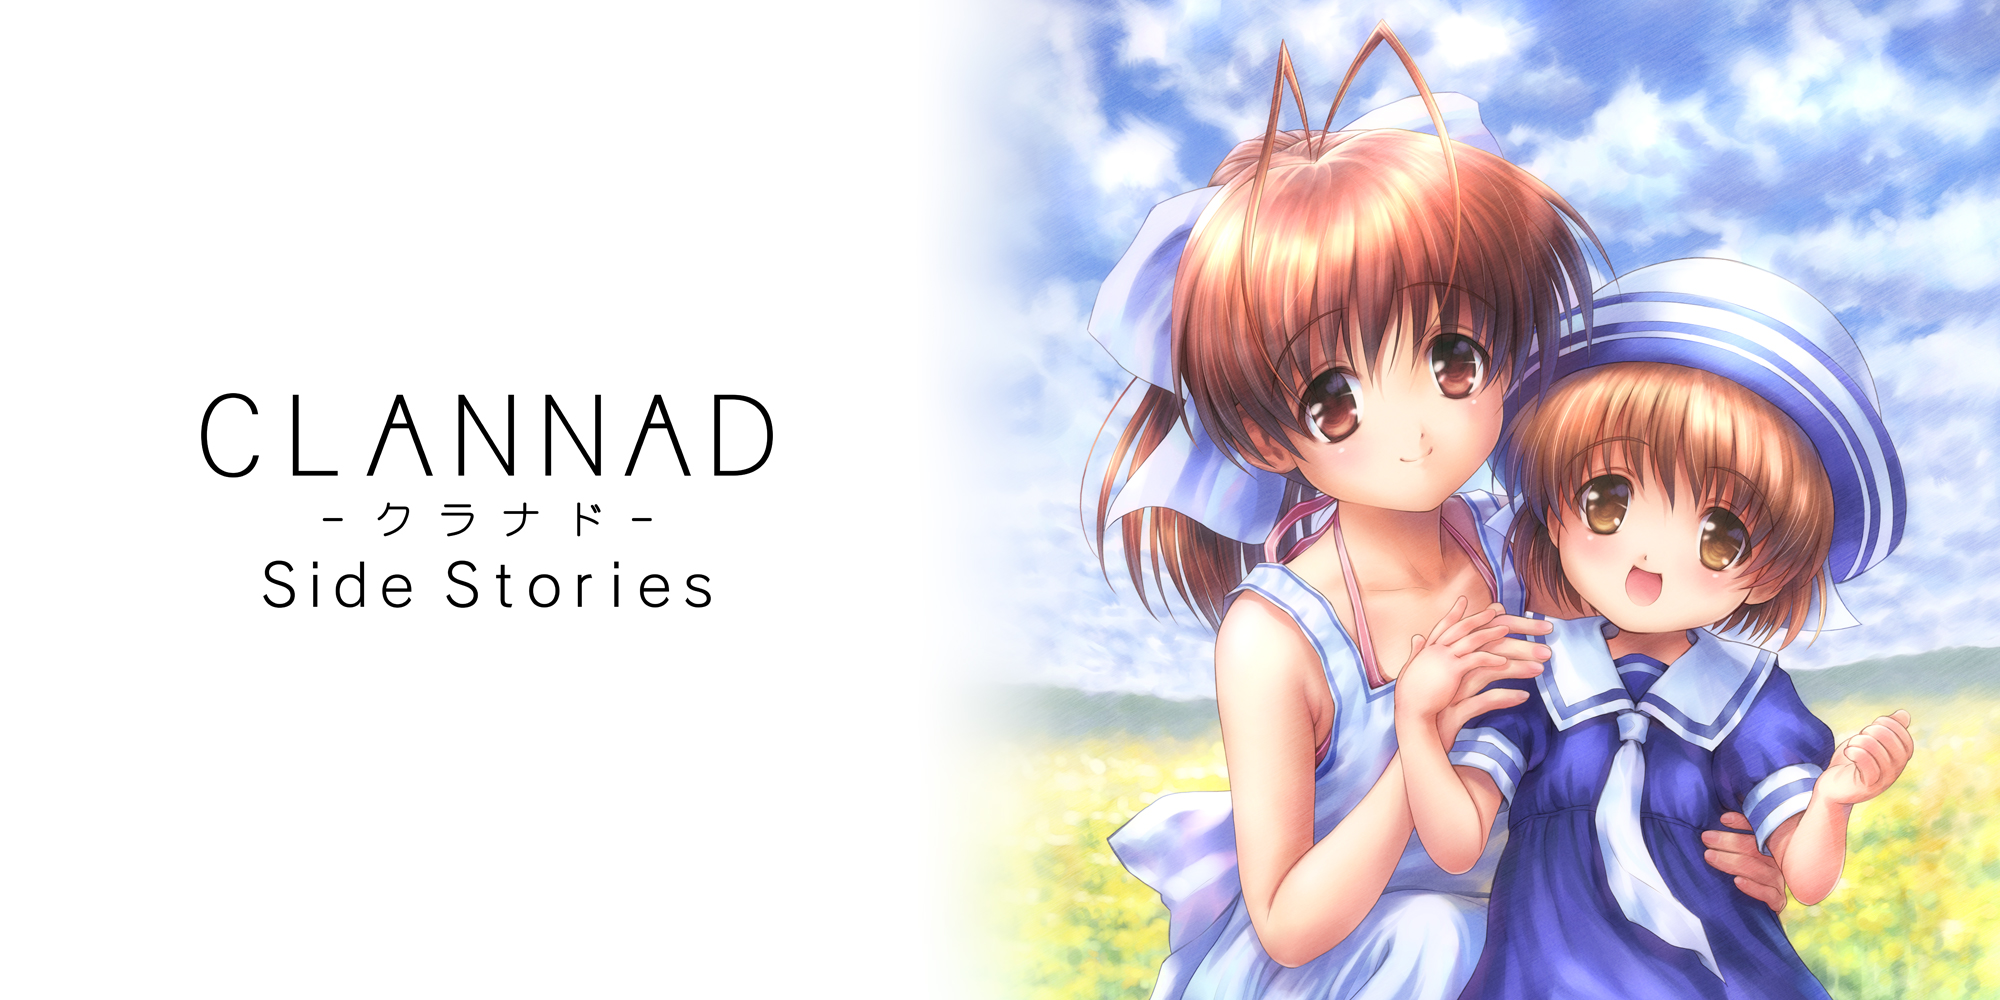 When you think about your life pre-Clannad. : Clannad